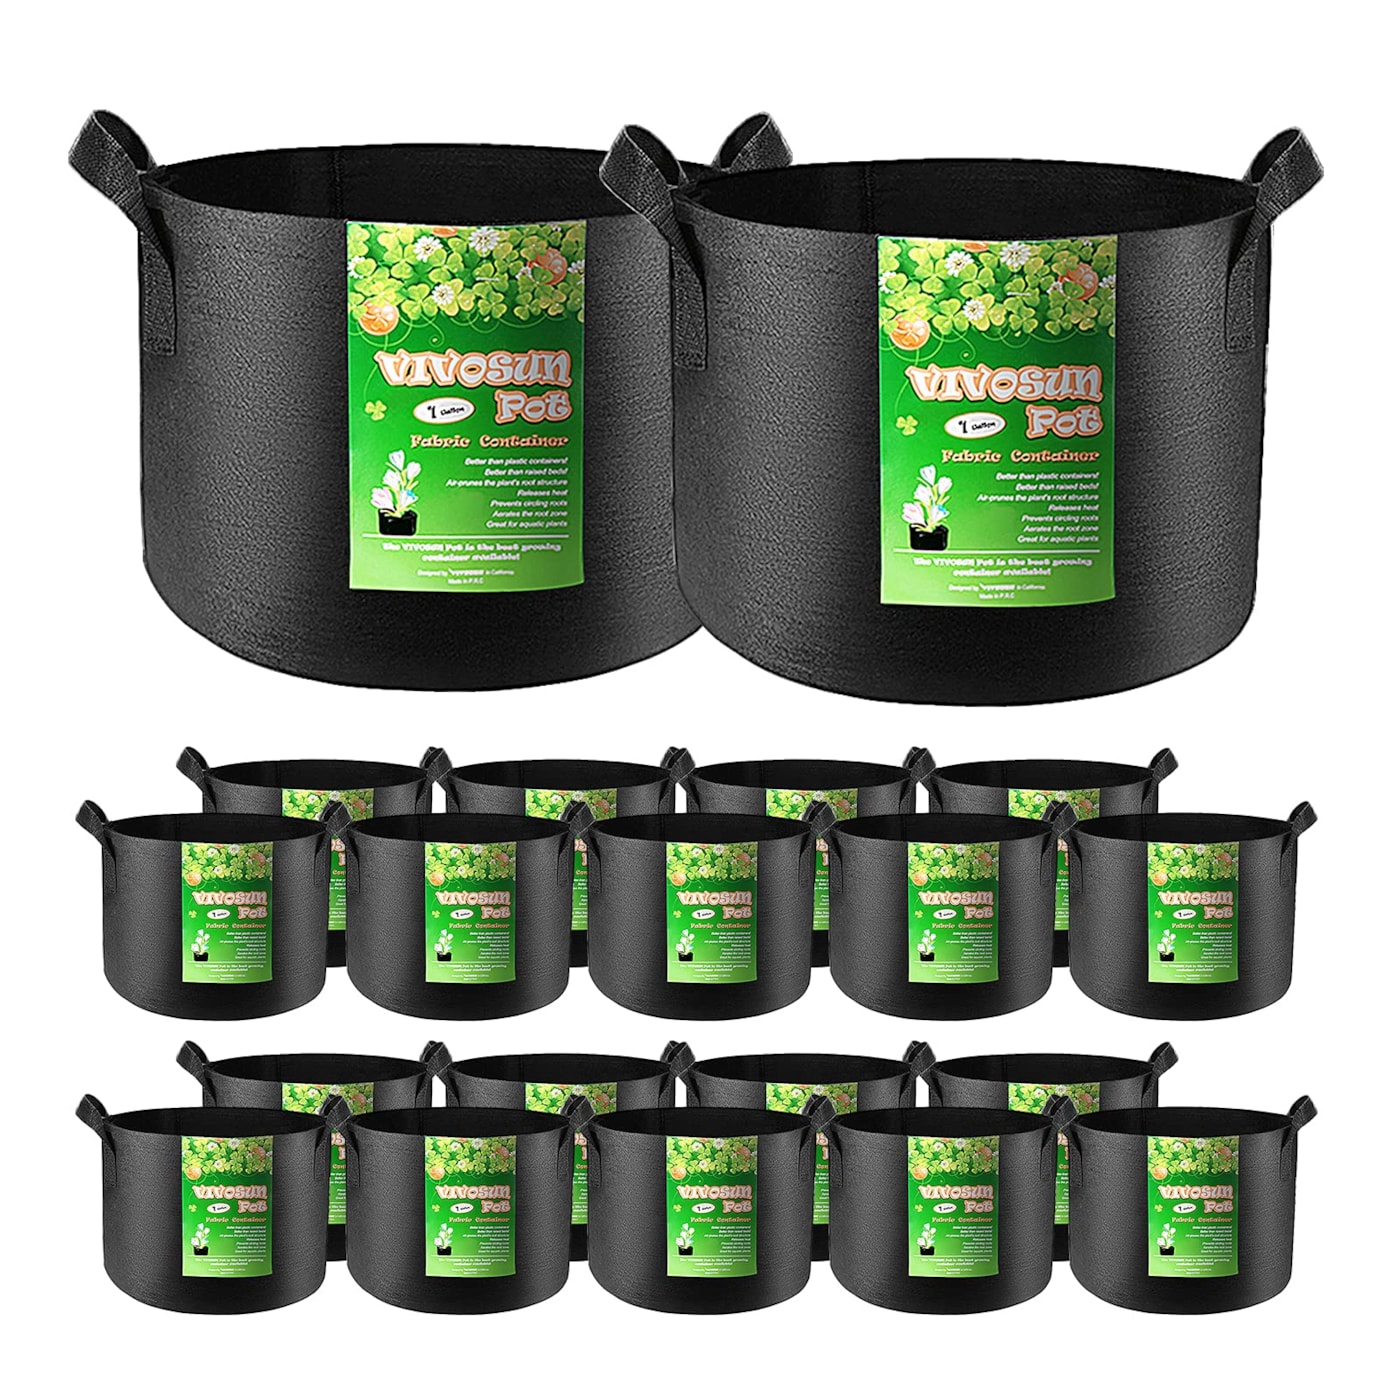 VIVOSUN 20-Pack 1 Gallon Grow Bags, Heavy Duty Thickened Nonwoven Fabric Pots with Handles for Flowers Fruits and Vegetables Black